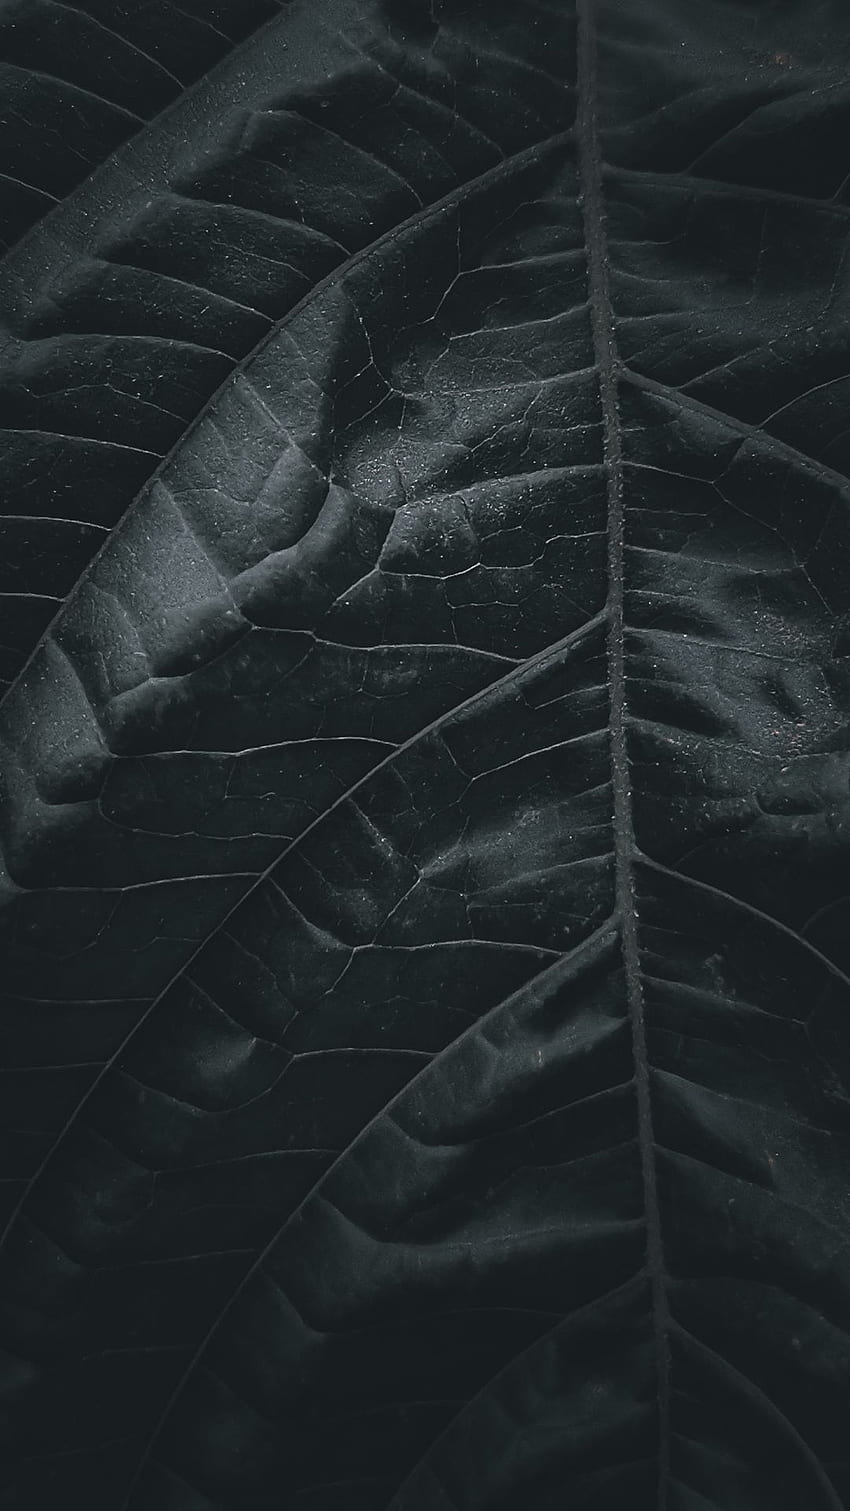 Dark Aesthetic Background For iPhone You'll Love. Glory of the Snow, Dark Leaves Aesthetic HD phone wallpaper